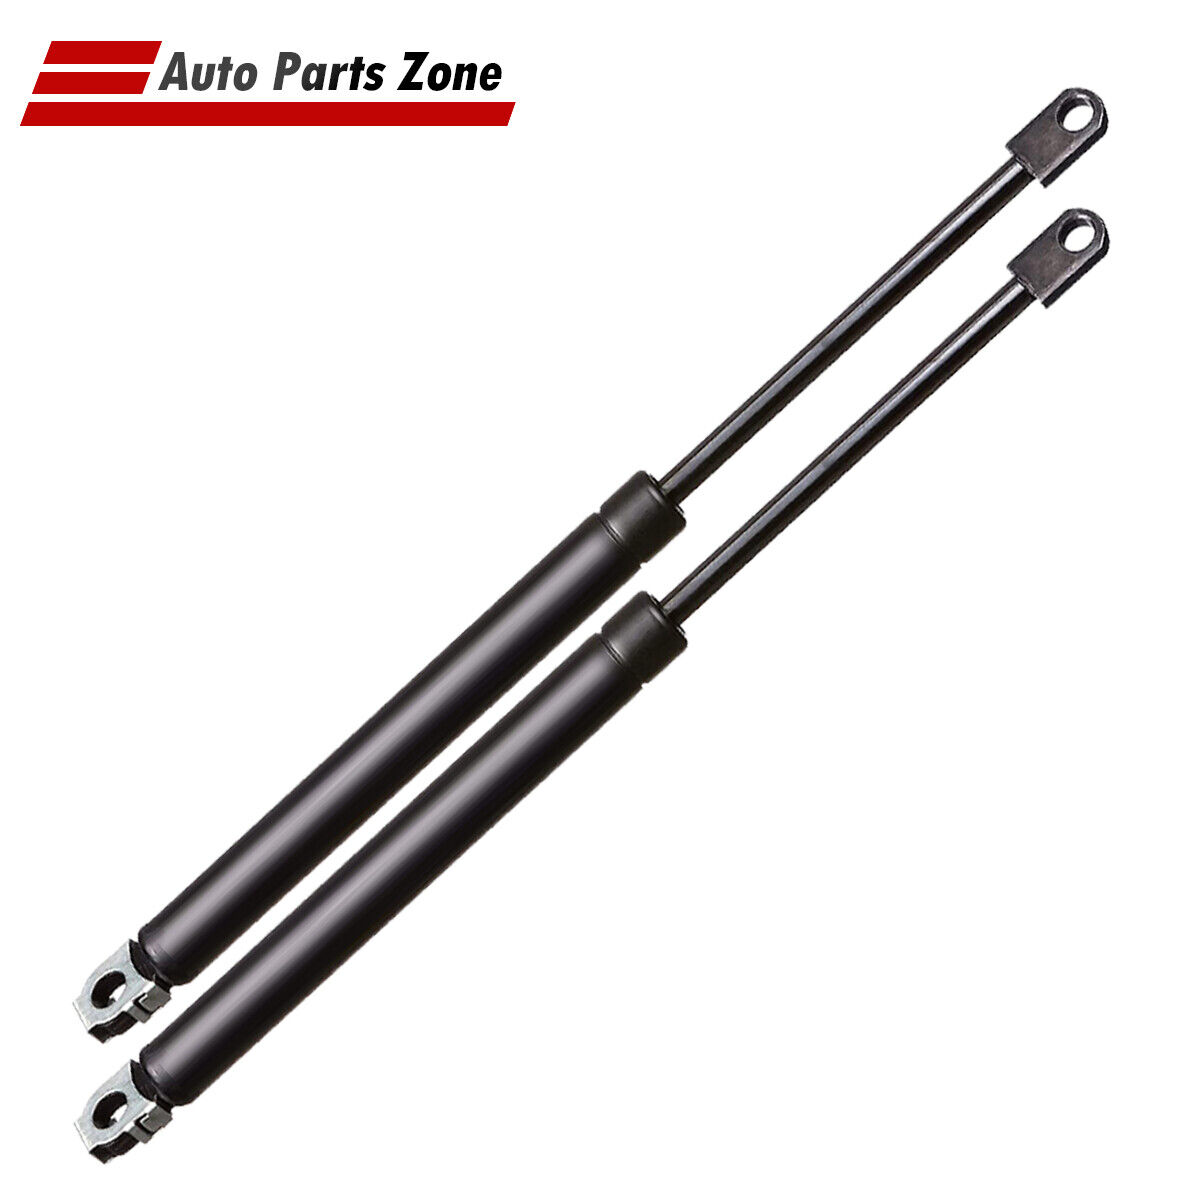 For Buick Regal 1978-1987 Front Hood Lift Supports Shock Struts X 2 SG330003